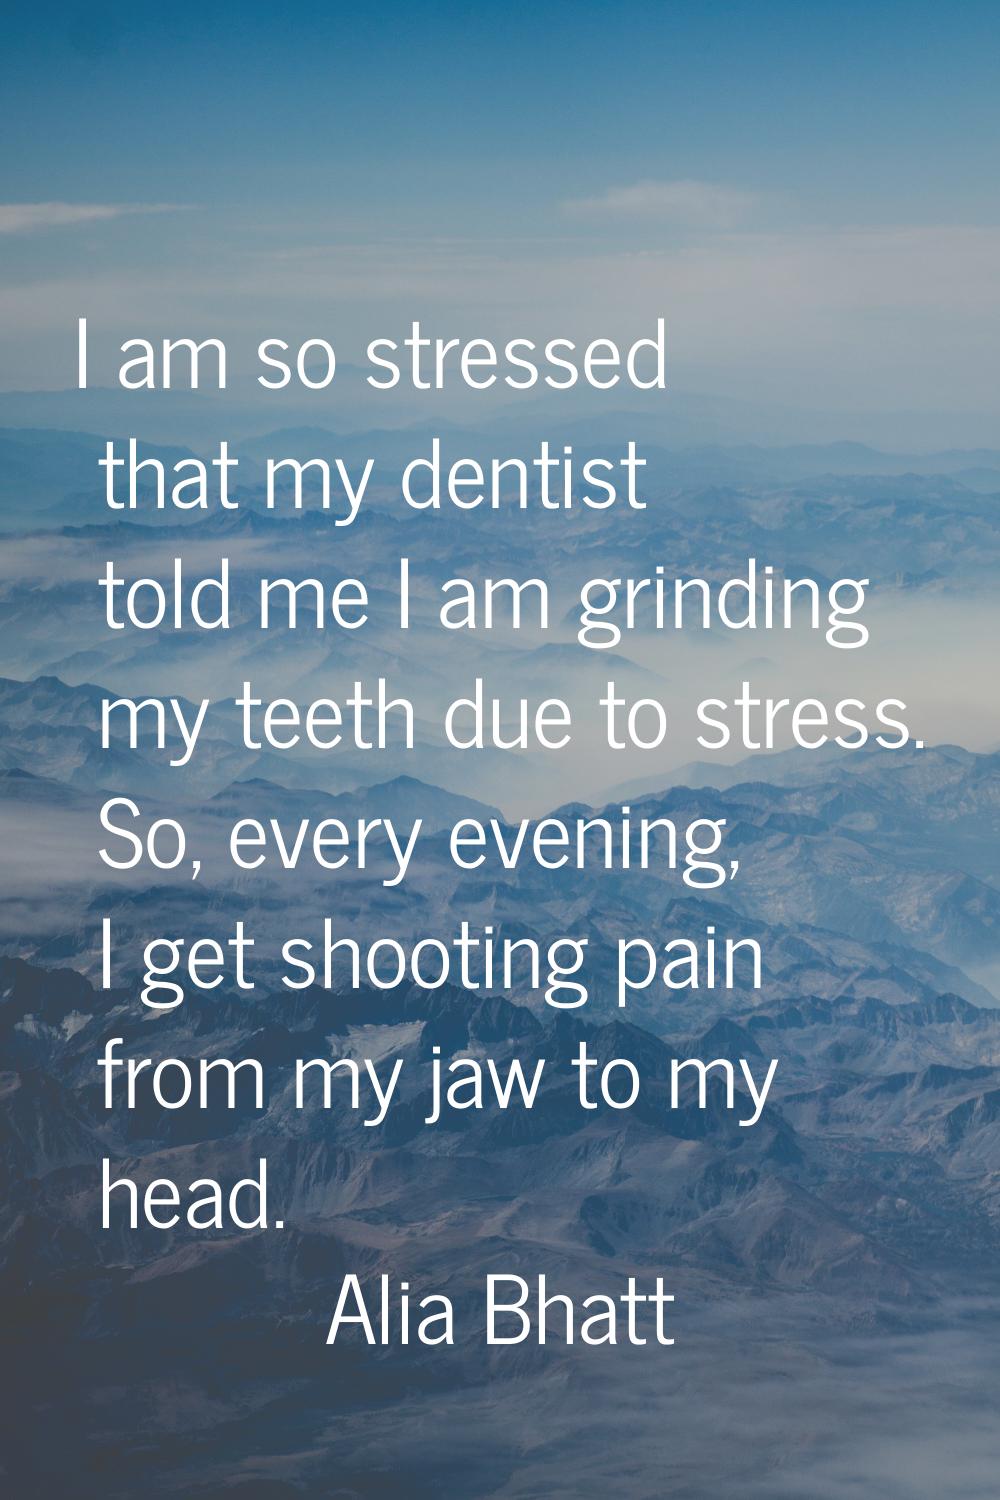 I am so stressed that my dentist told me I am grinding my teeth due to stress. So, every evening, I